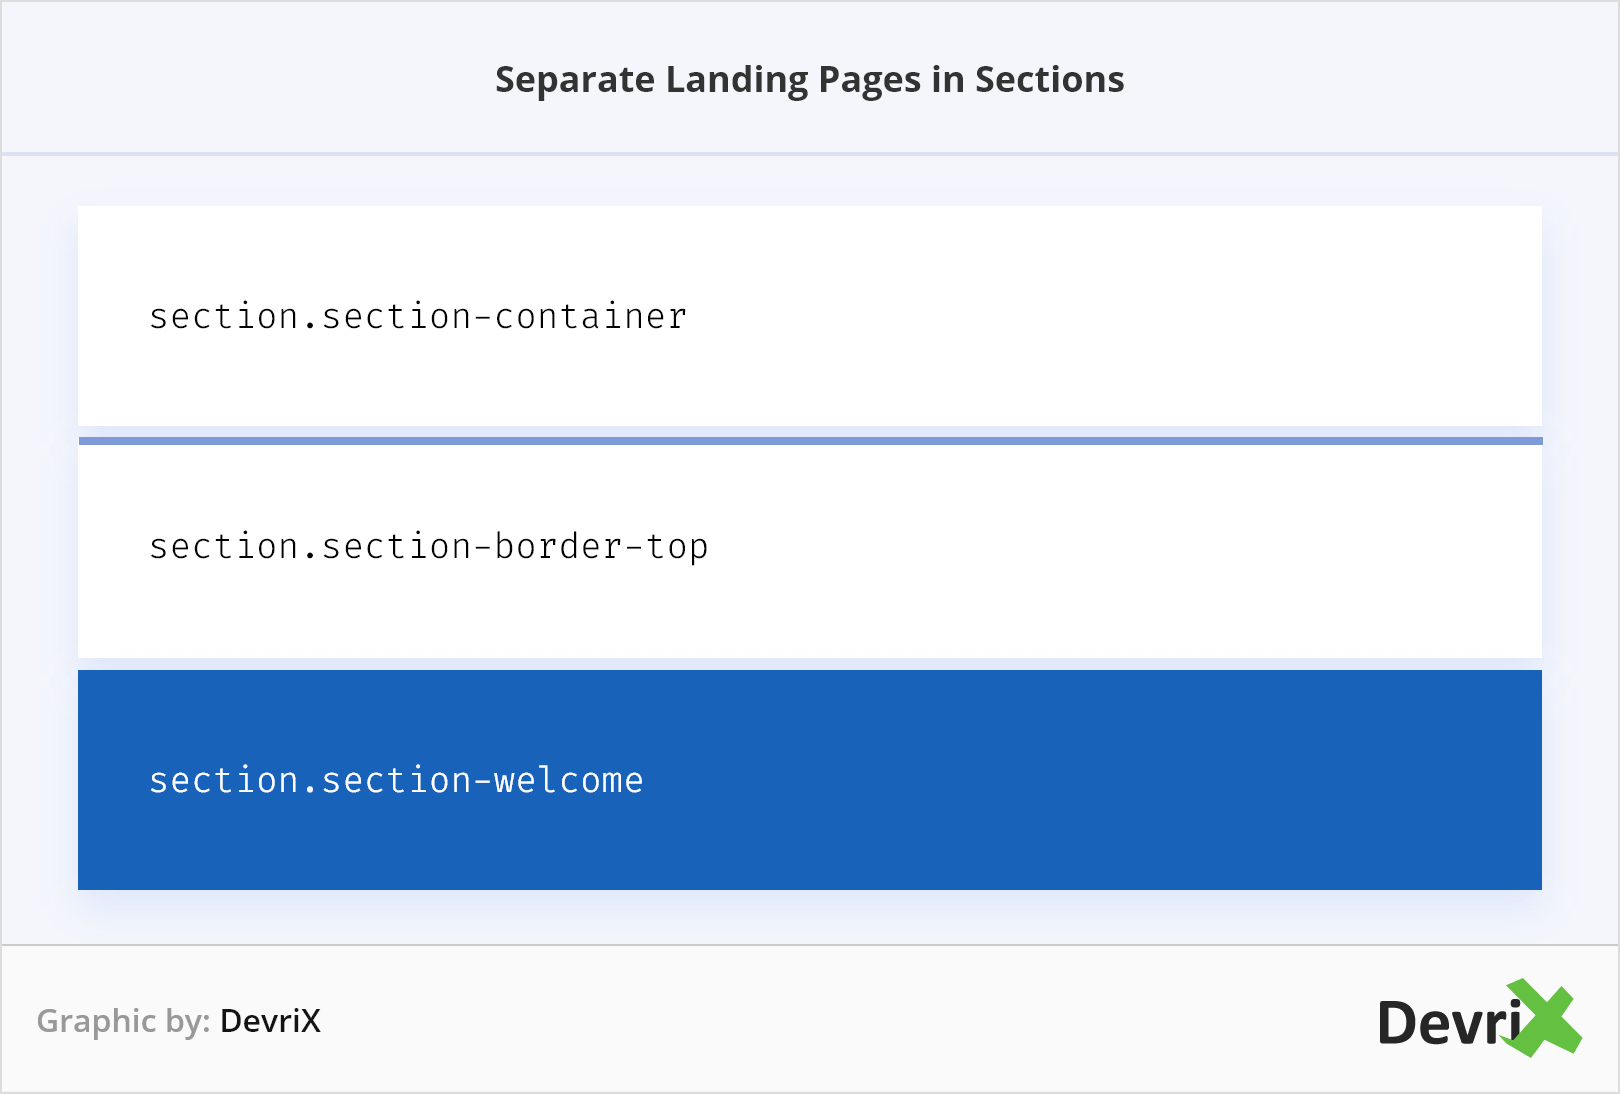 Separate landing pages in sections